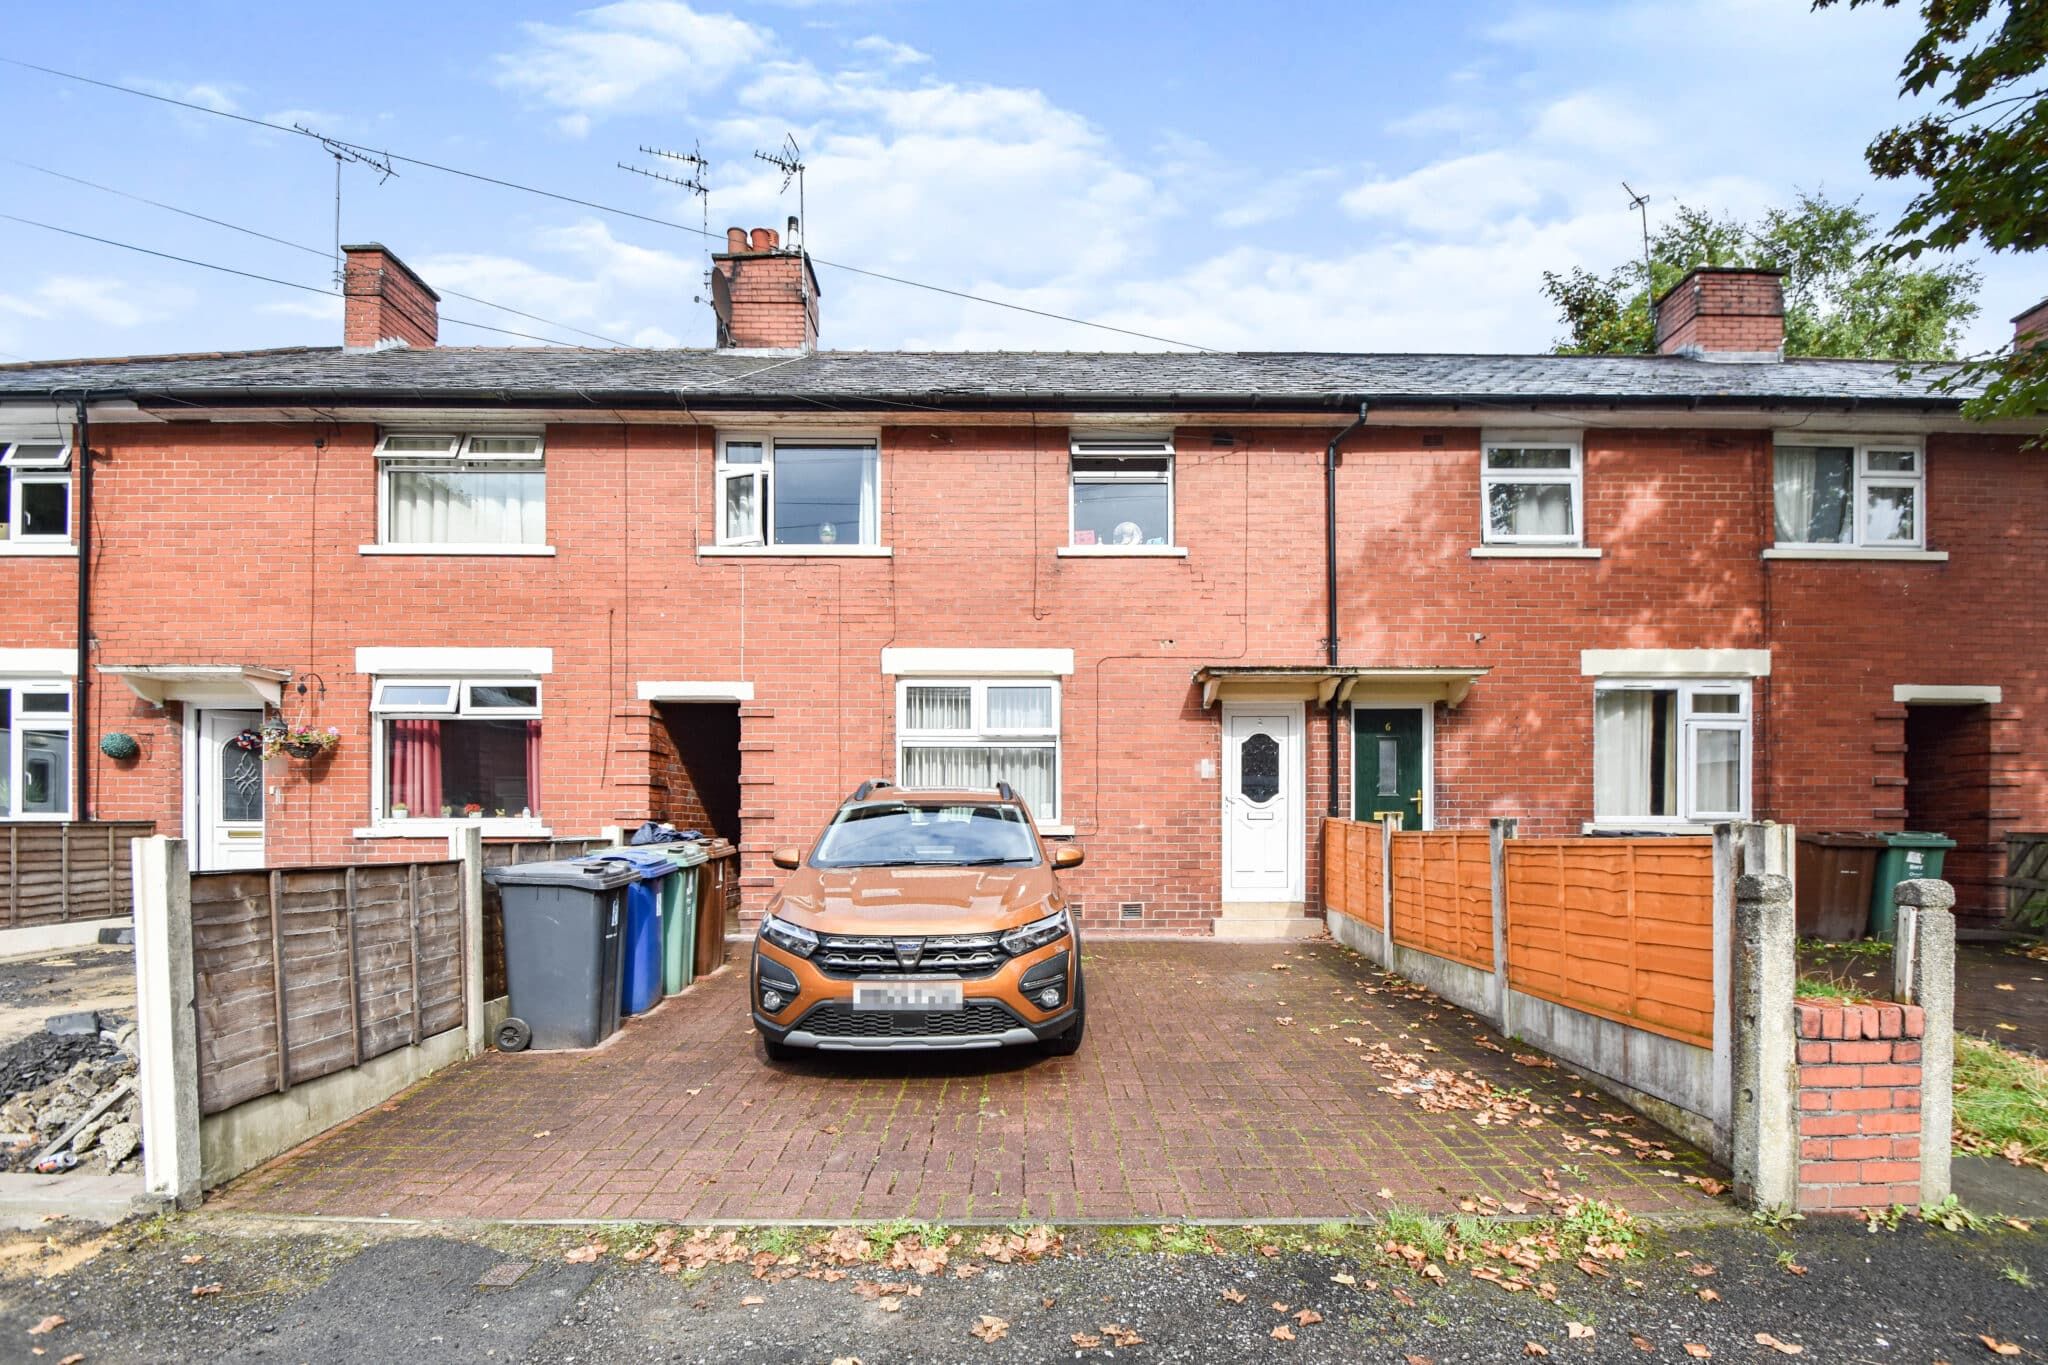 Rydal Grove, Whitefield, Manchester, Manchester, M45 6FD